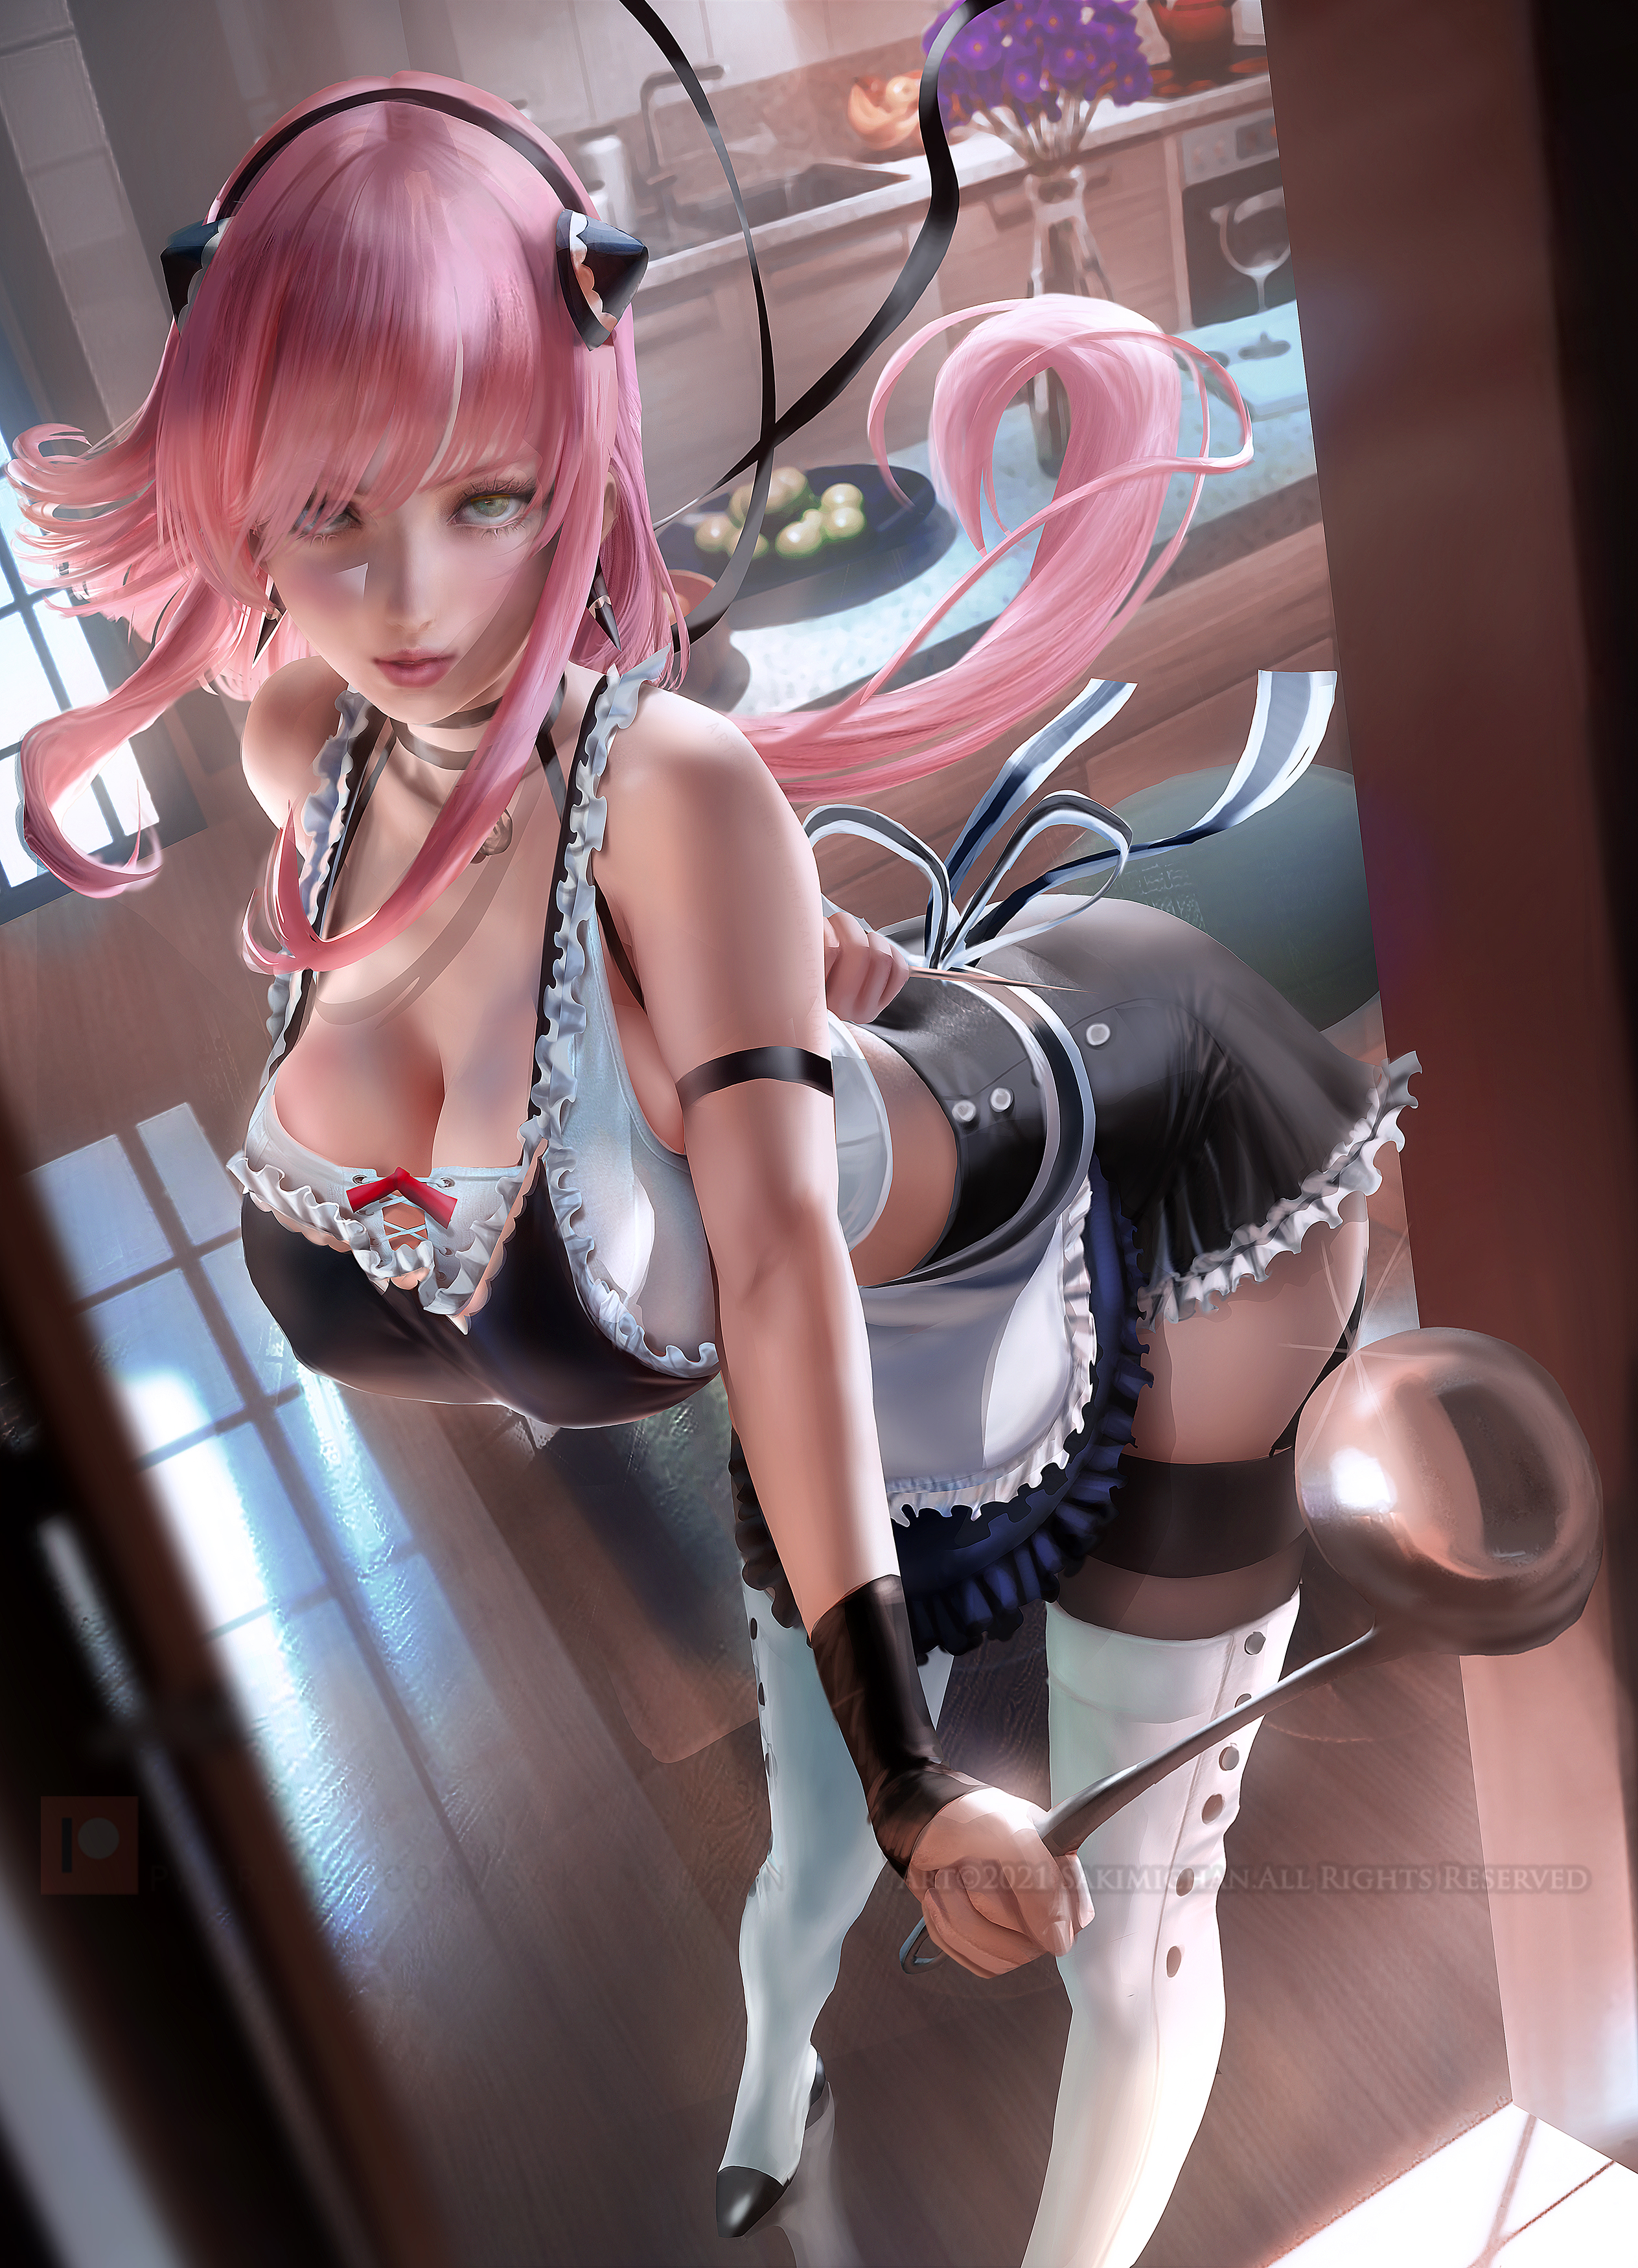 Anime 2528x3500 Anya Forger Spy x Family anime anime girls artwork drawing fan art Sakimichan maid maid outfit pink hair long hair white thigh highs black stockings stockings green eyes white boots big boobs spoon knife weapon